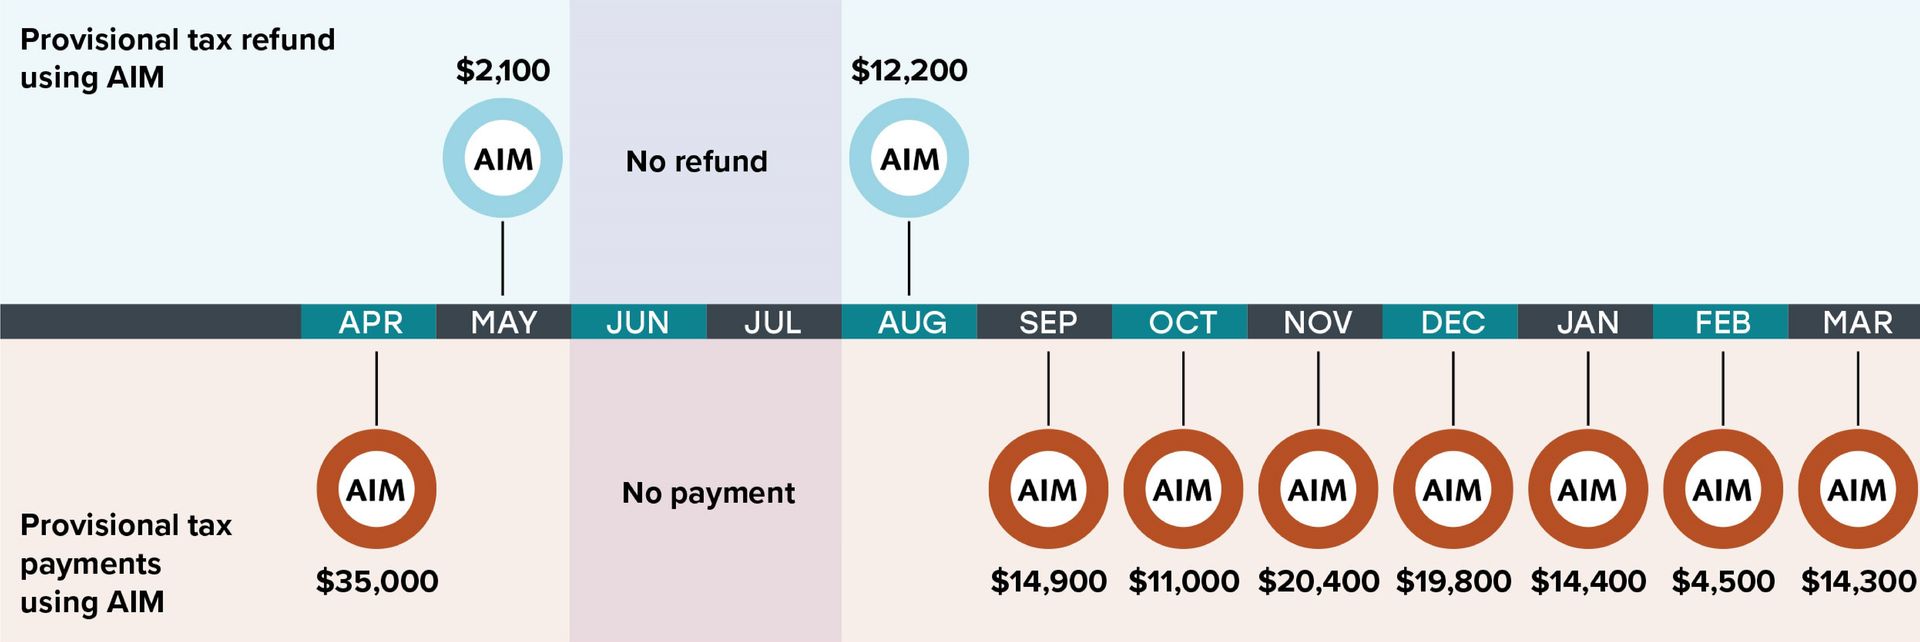 Timeline showing monthly payments and refunds